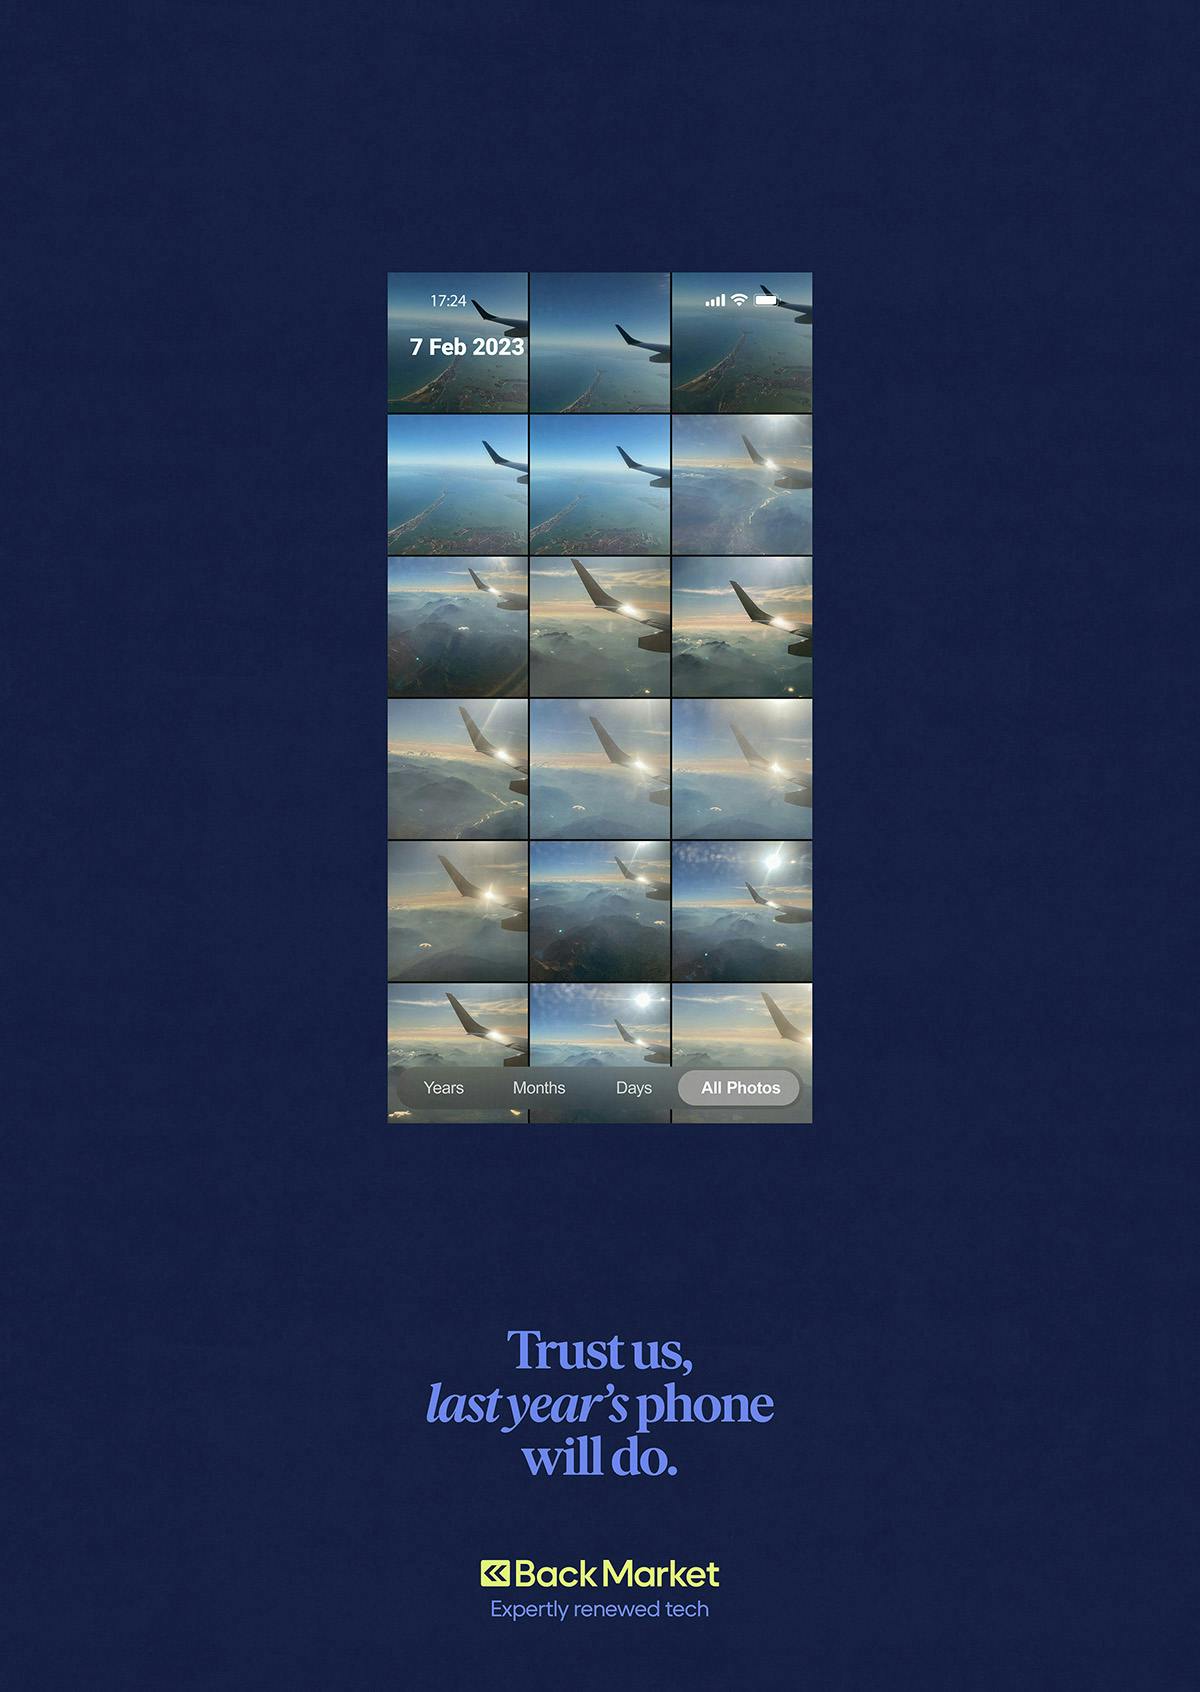 Image from Back Market's campaign showing a picture of a camera roll filled with near identical photos of a plane wing in the sky, and the headline 'Trust us, last year's phone will do' on a dark blue background